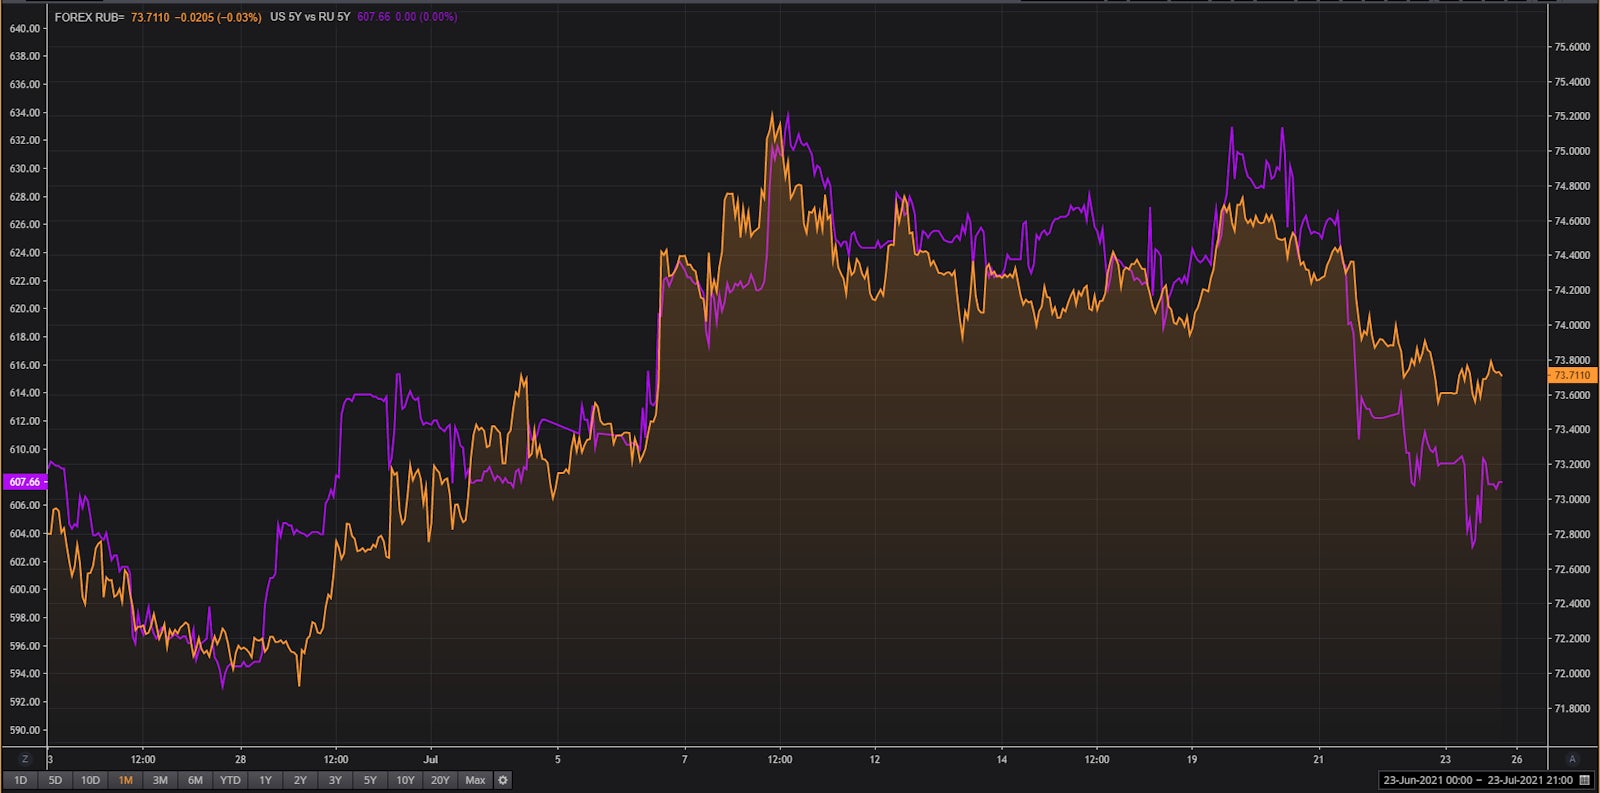 Russian Rouble And 5-Year Rates Differentials With the US | Source: Refinitiv